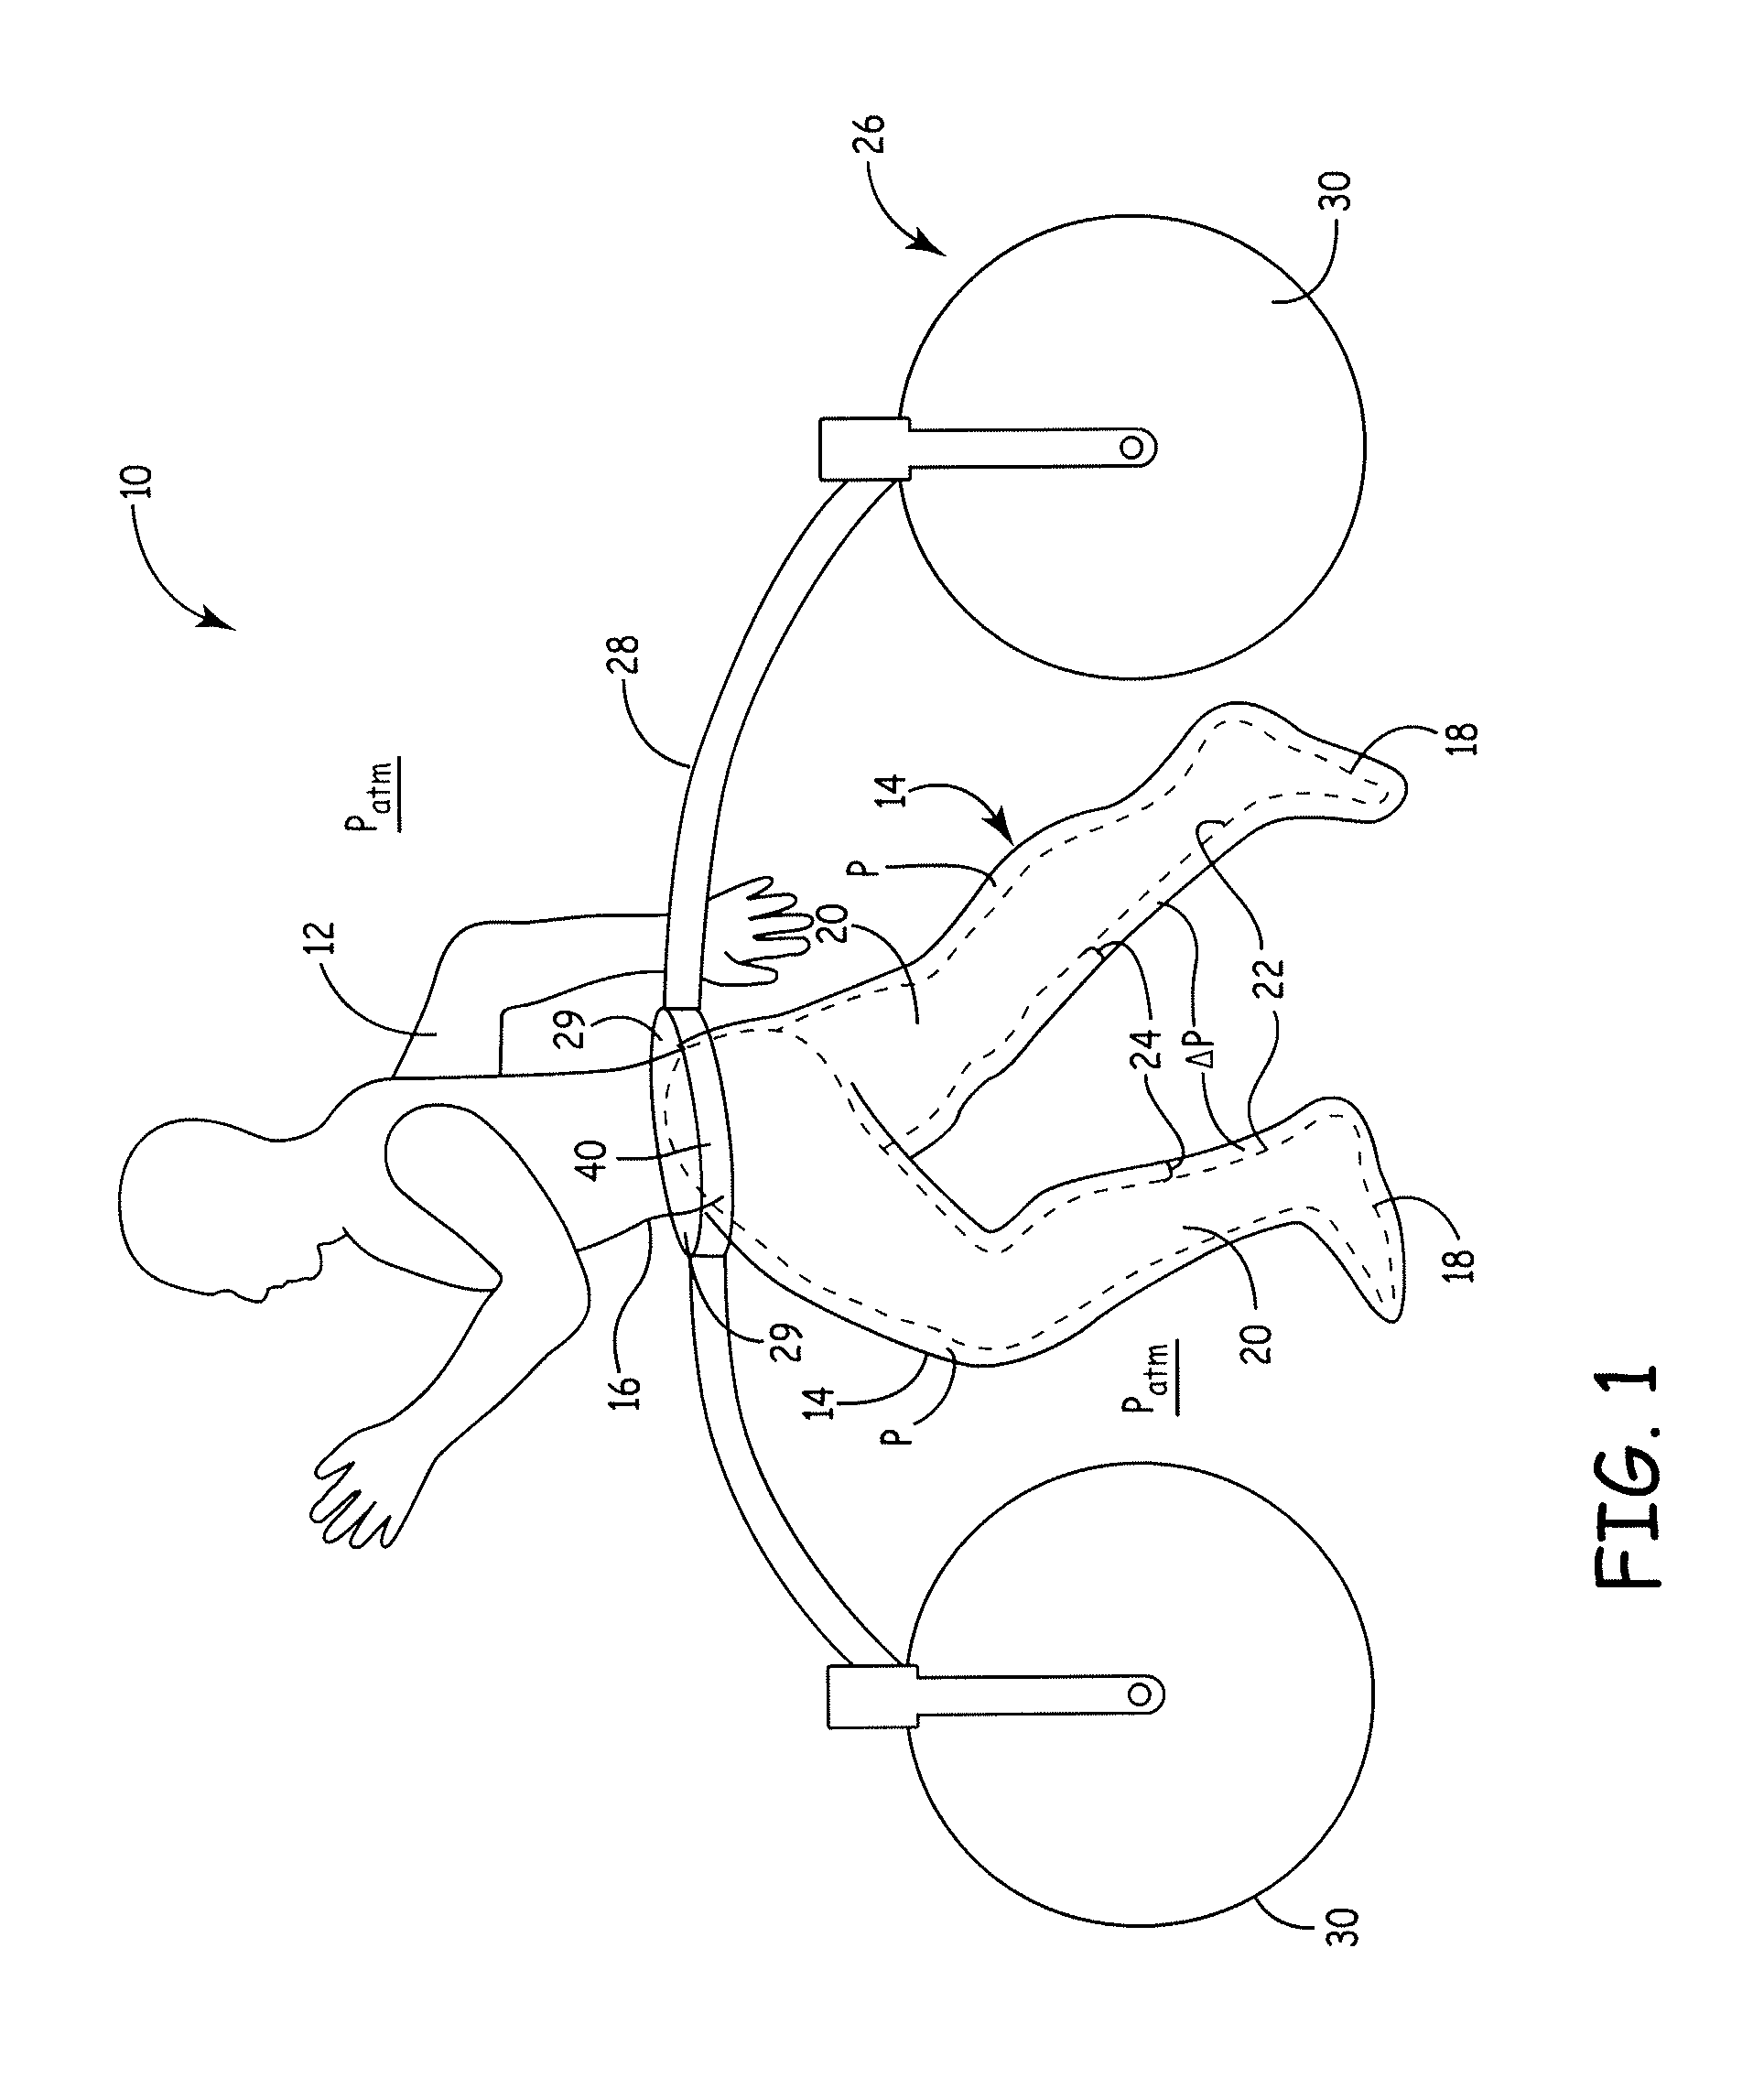 Suspension and body attachment system and differential pressure suit for body weight support devices